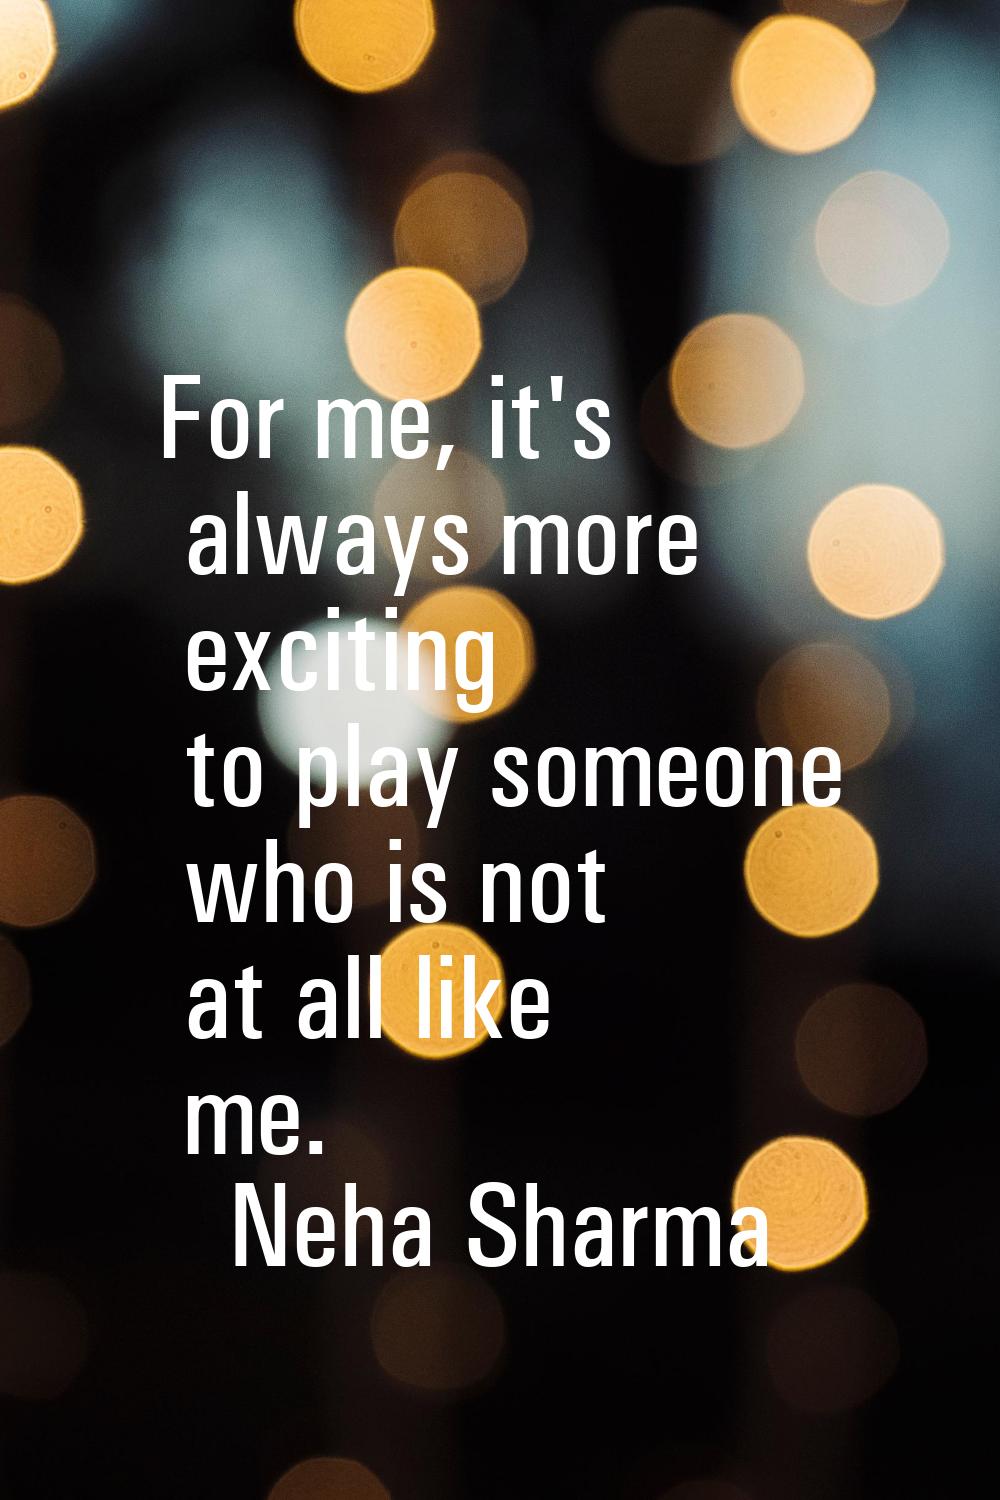 For me, it's always more exciting to play someone who is not at all like me.